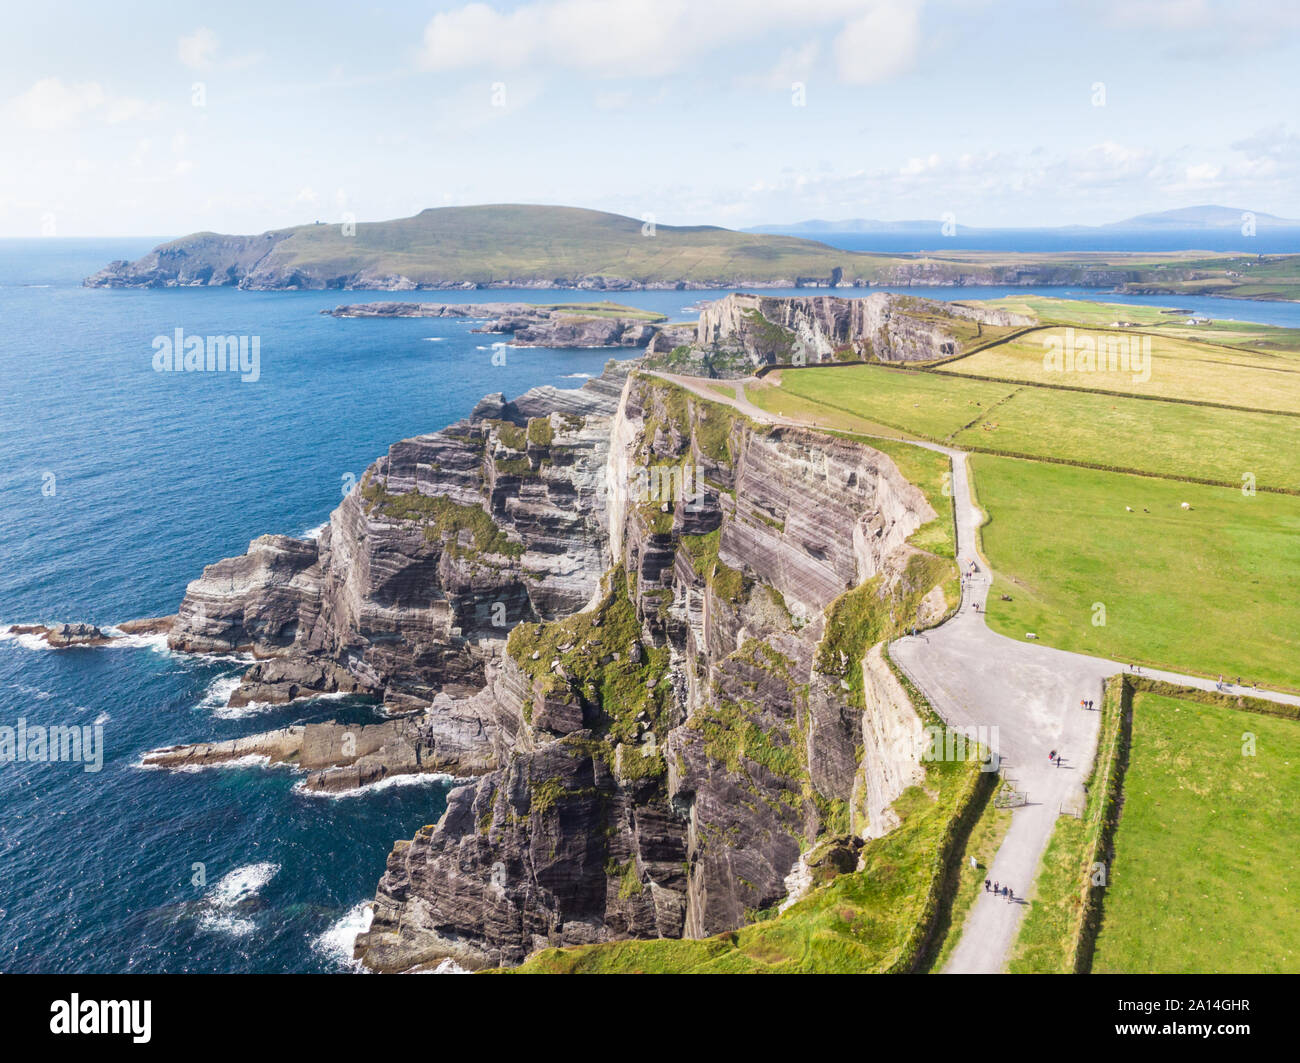 An Aerial view of the spectacular Kerry Cliffs on the Skellig Coast of County Kerry in Ireland. Stock Photo